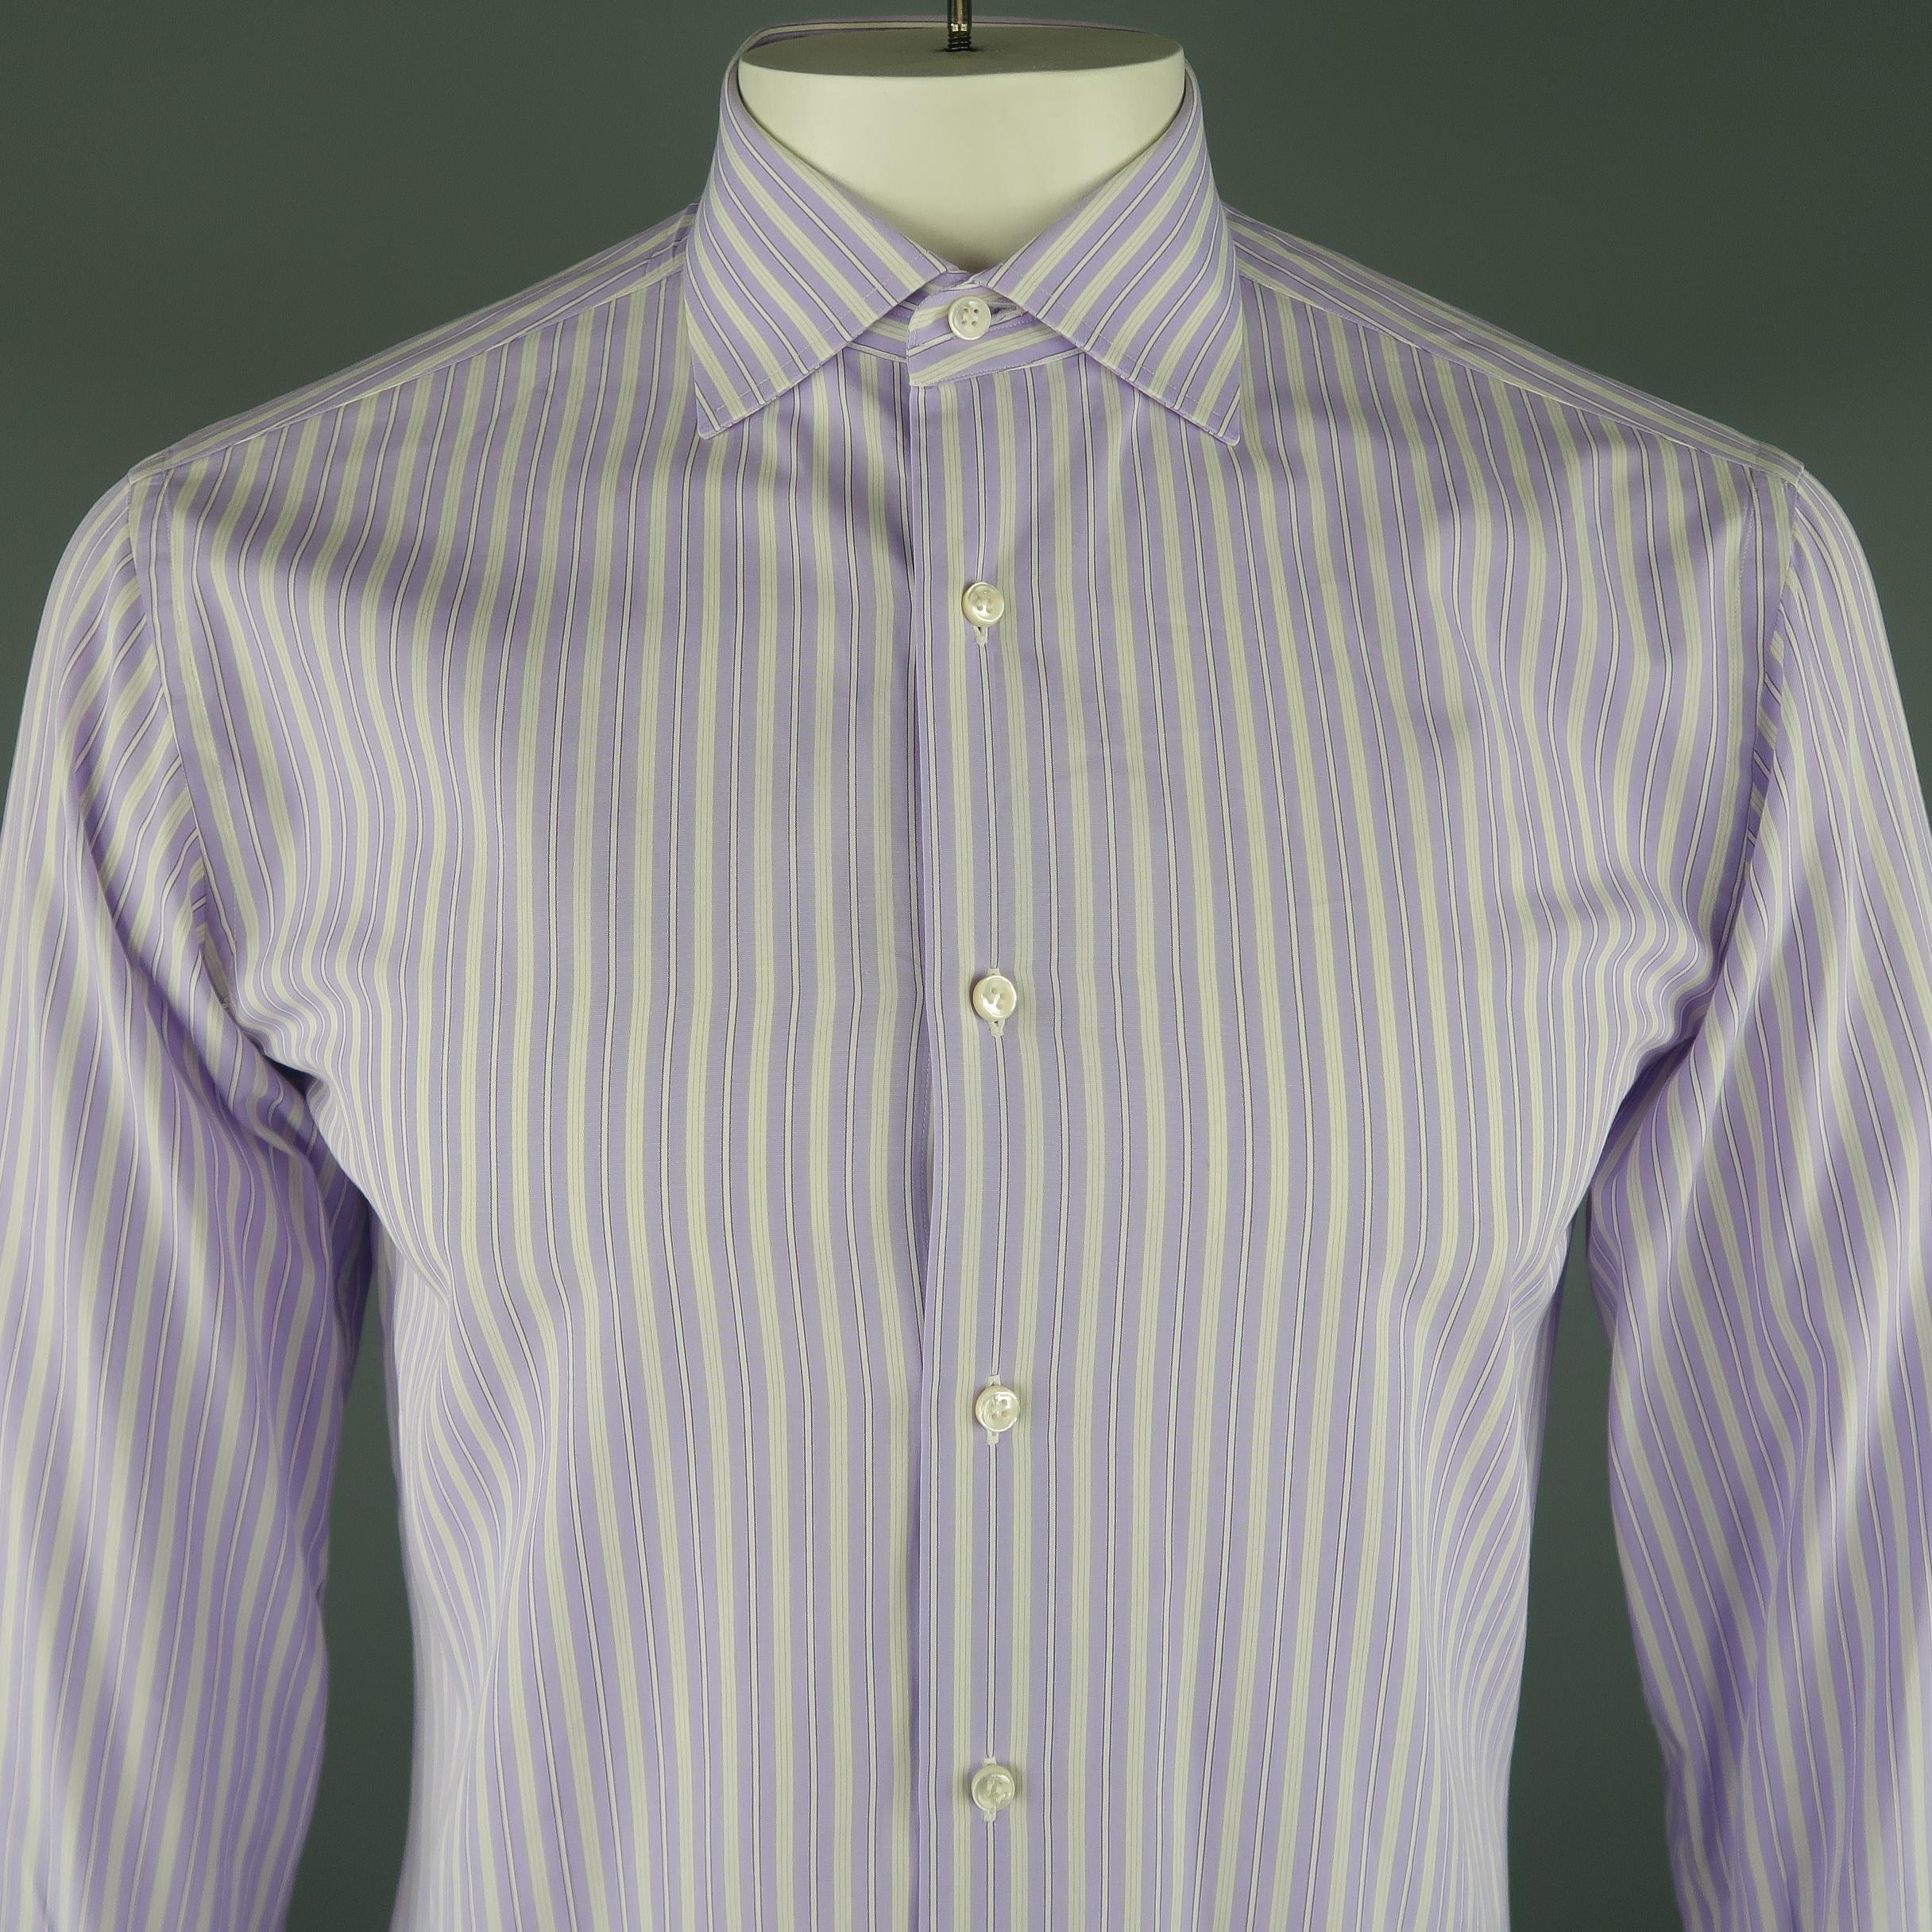 BRIONI long sleeve shirt comes in purple and white tones in striped cotton material, with a spread collar, button up. Made in Italy.
 
Excellent Pre-Owned Condition.
Marked: 40 / 15
 
Measurements:
 
Shoulder: 17.5 in.
Chest: 44 in.
Sleeve: 25